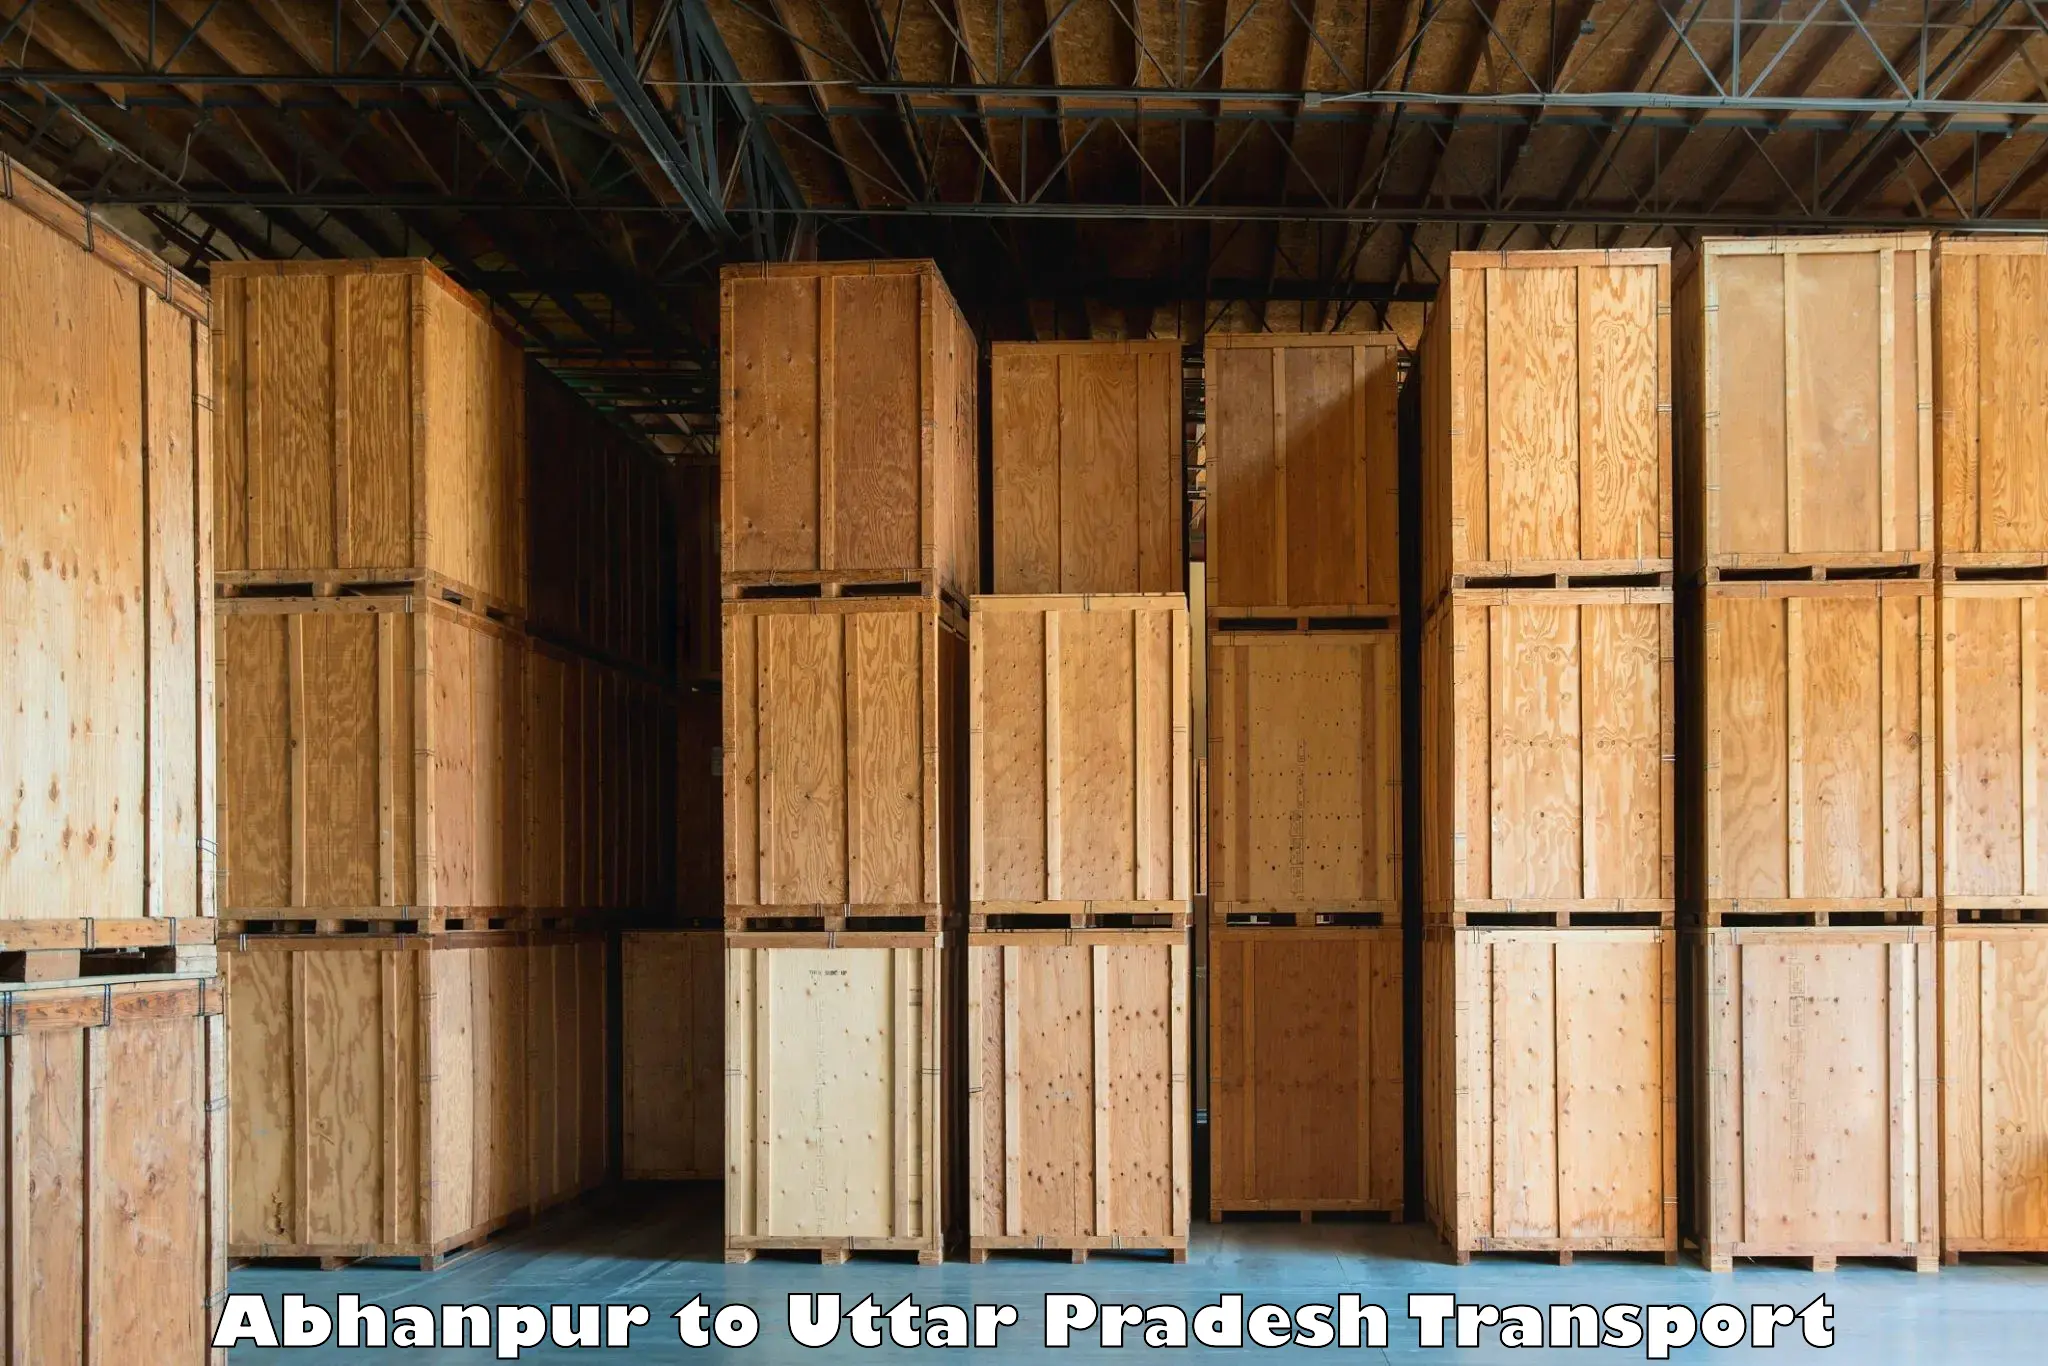 Express transport services Abhanpur to Allahabad